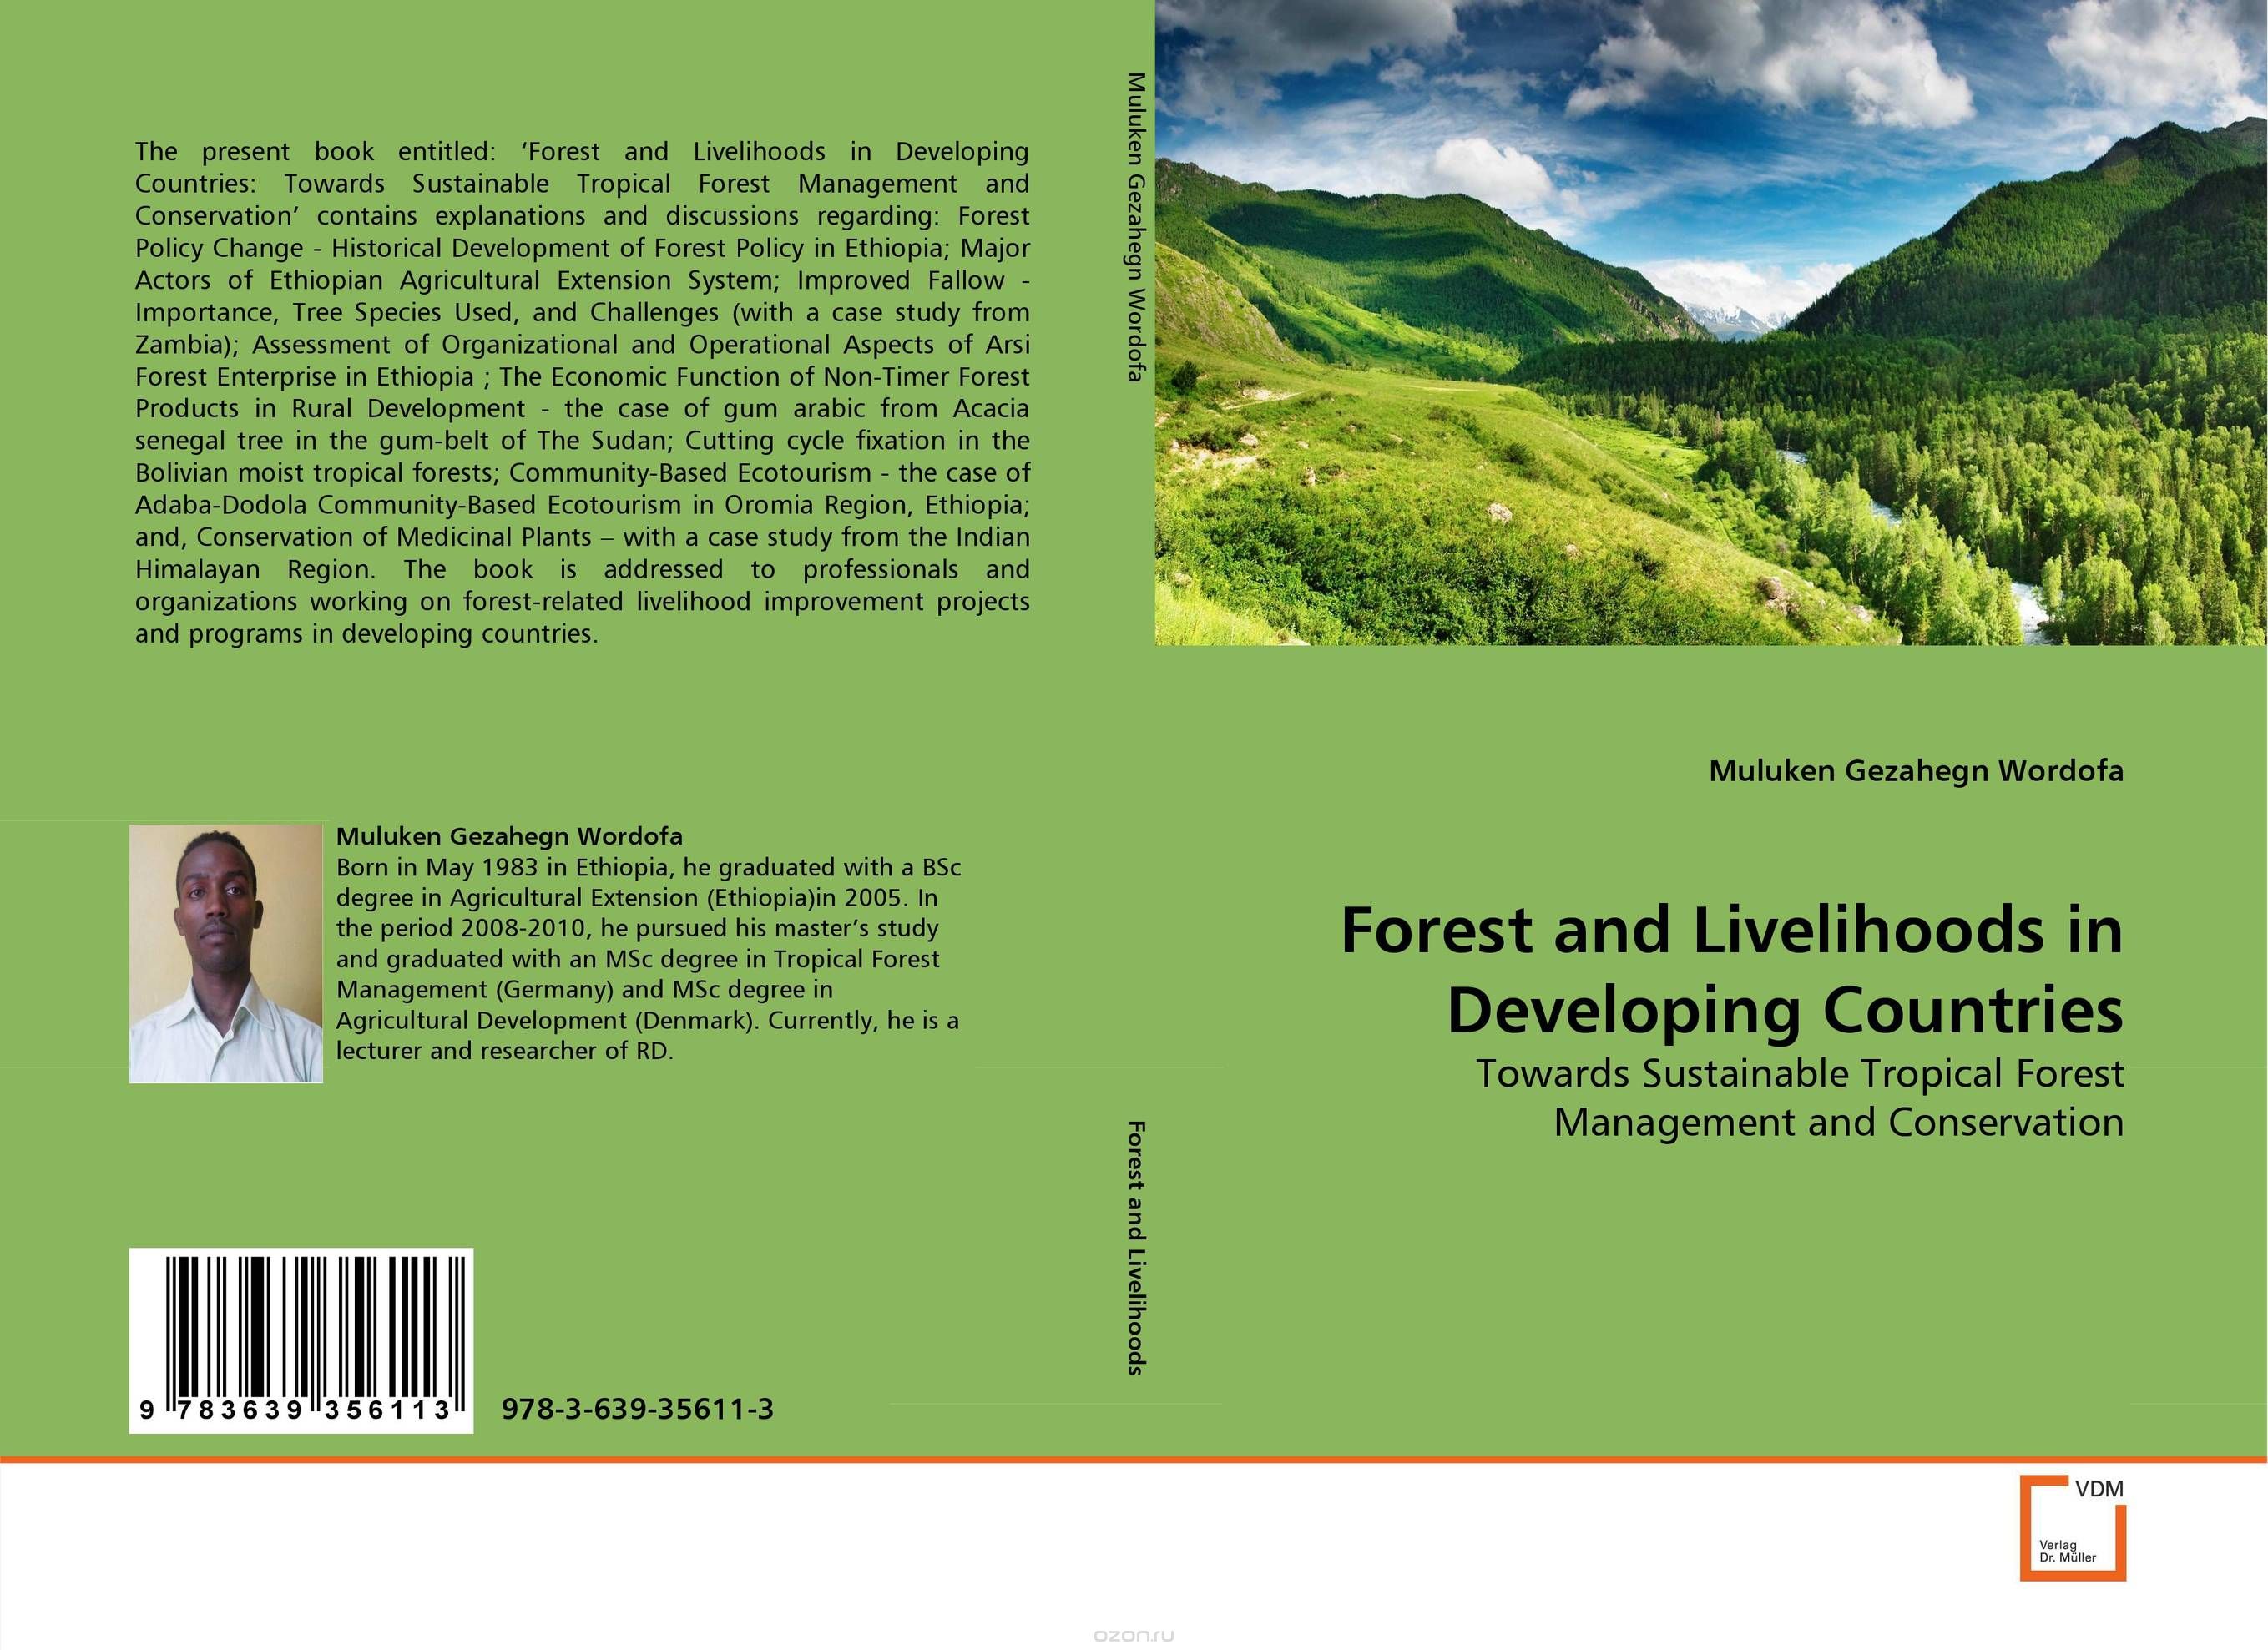 Forest and Livelihoods in Developing Countries